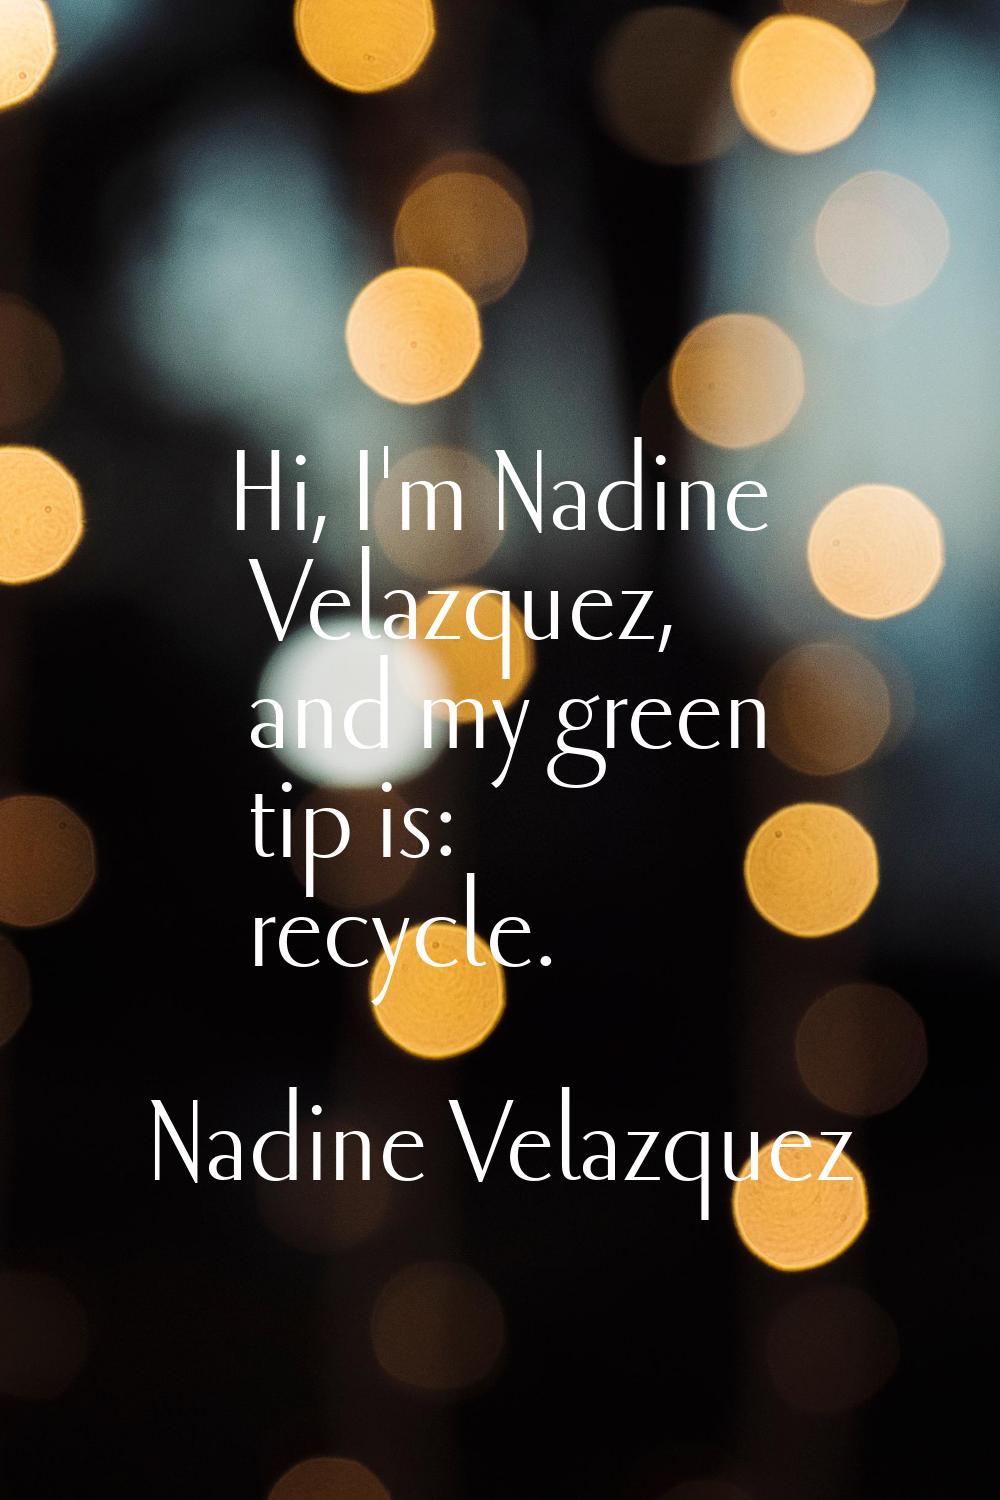 Hi, I'm Nadine Velazquez, and my green tip is: recycle.